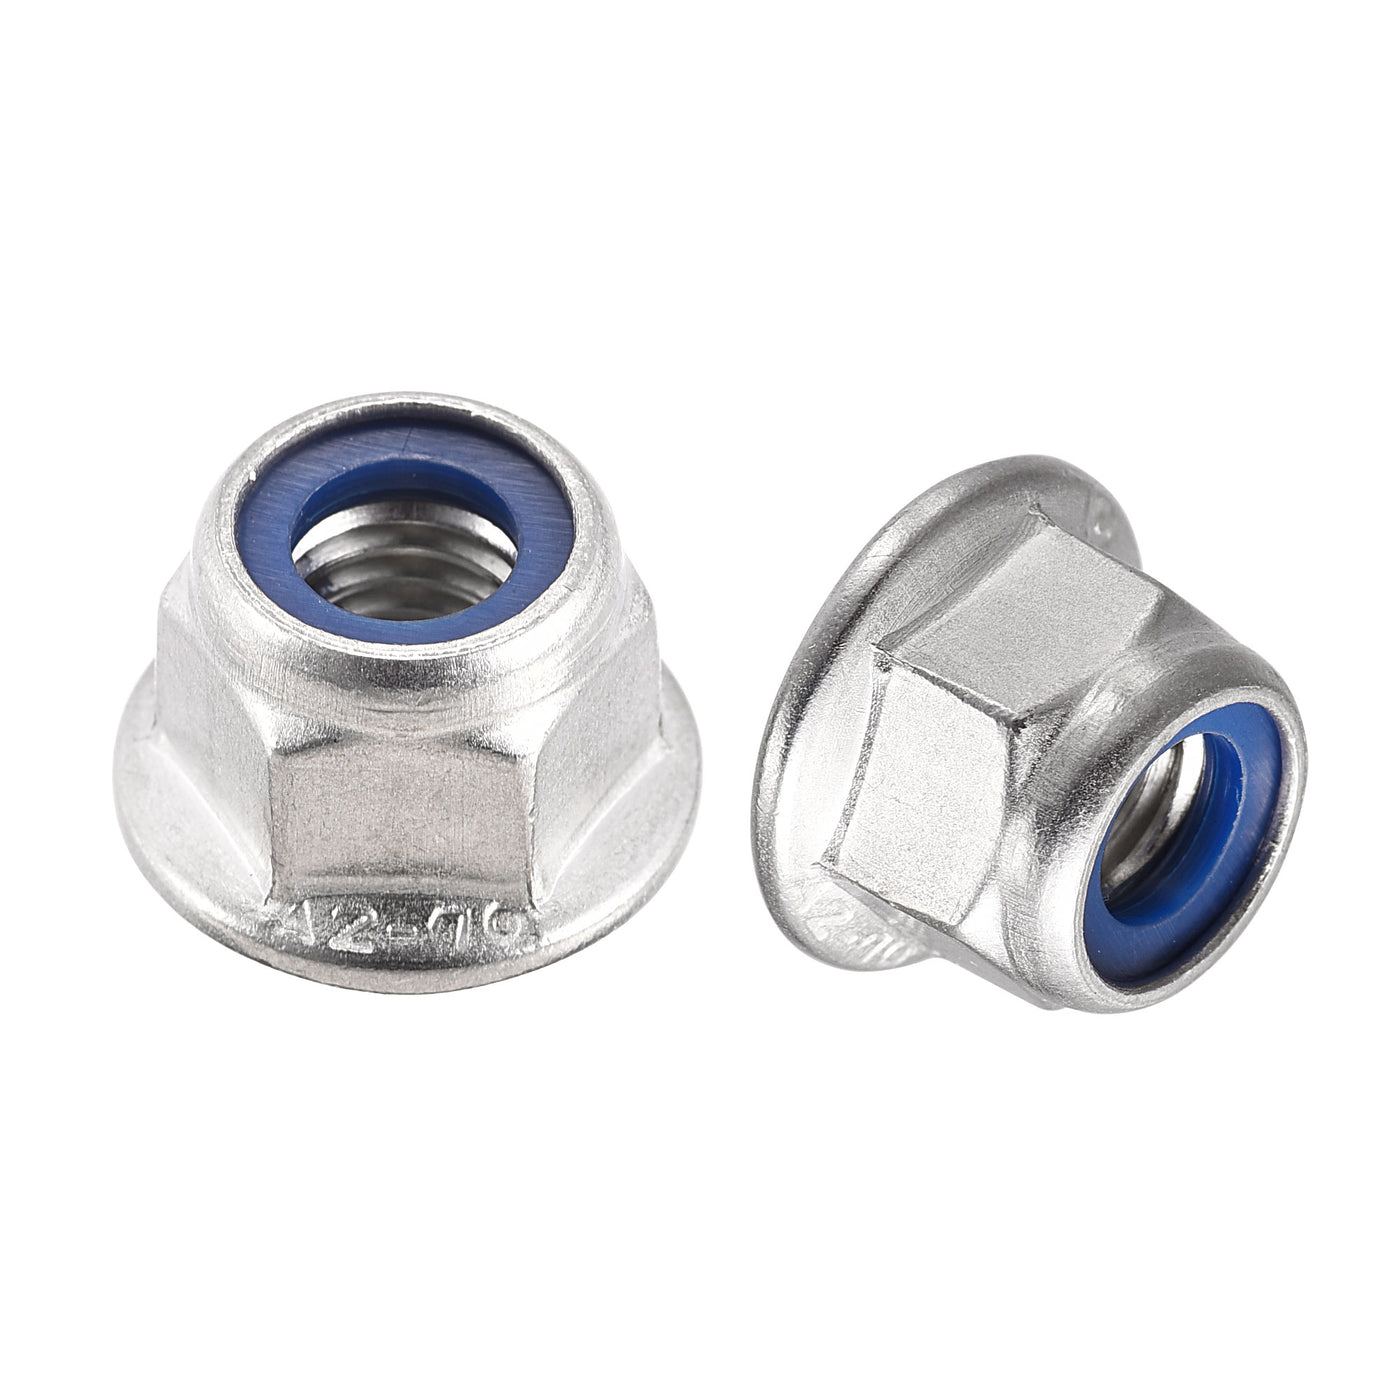 uxcell Uxcell Nylon Insert Hex Lock Nuts with Flange, 304 Stainless Steel for Industrial